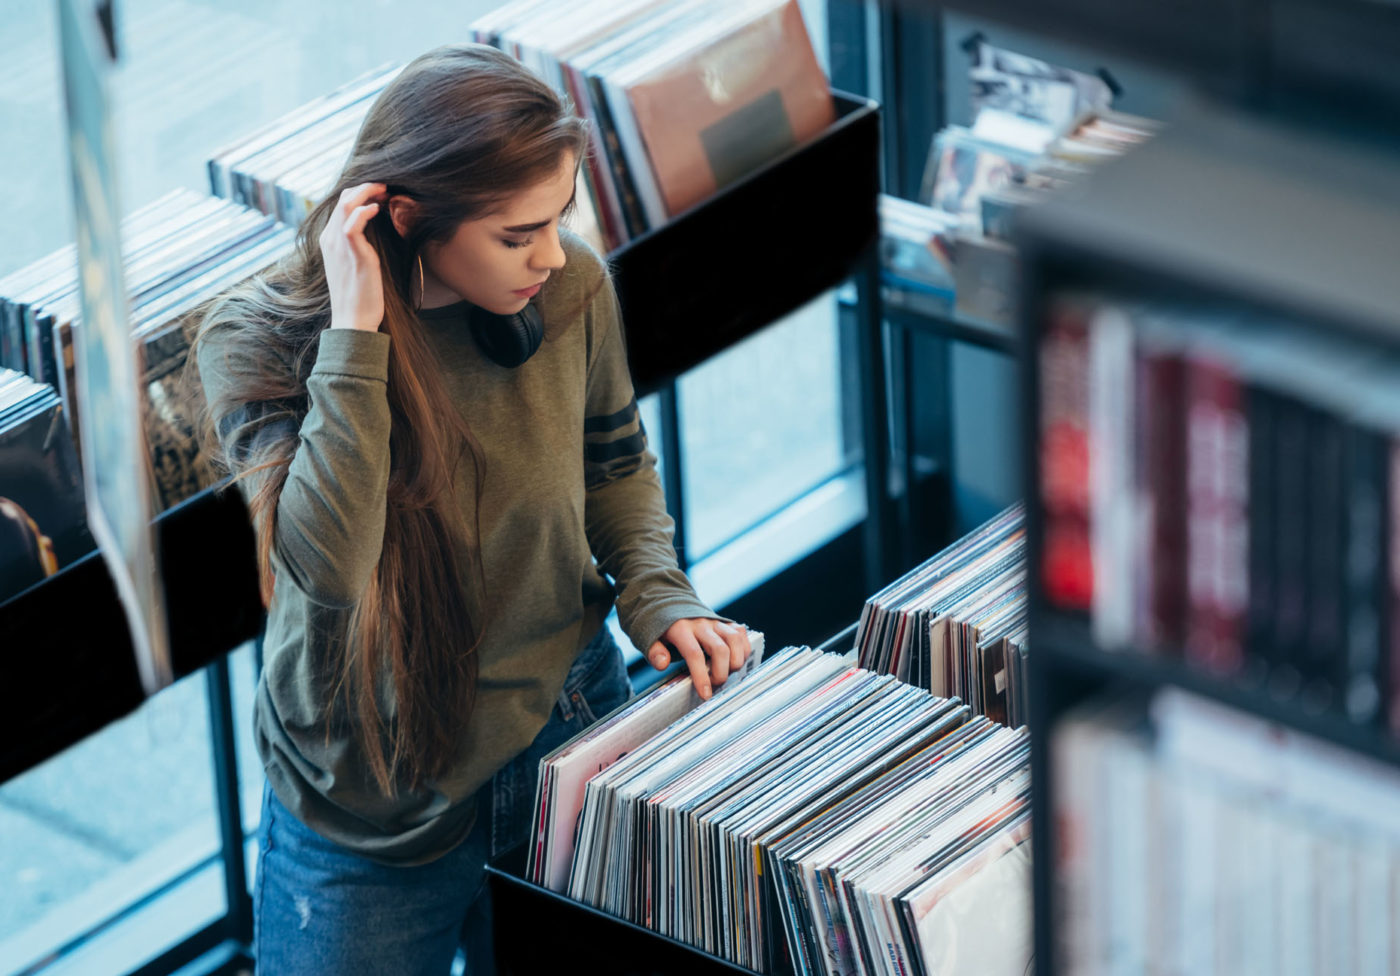 Gorgeous young woman looking for vinyl records in a vintage store. Vintage and retro style.